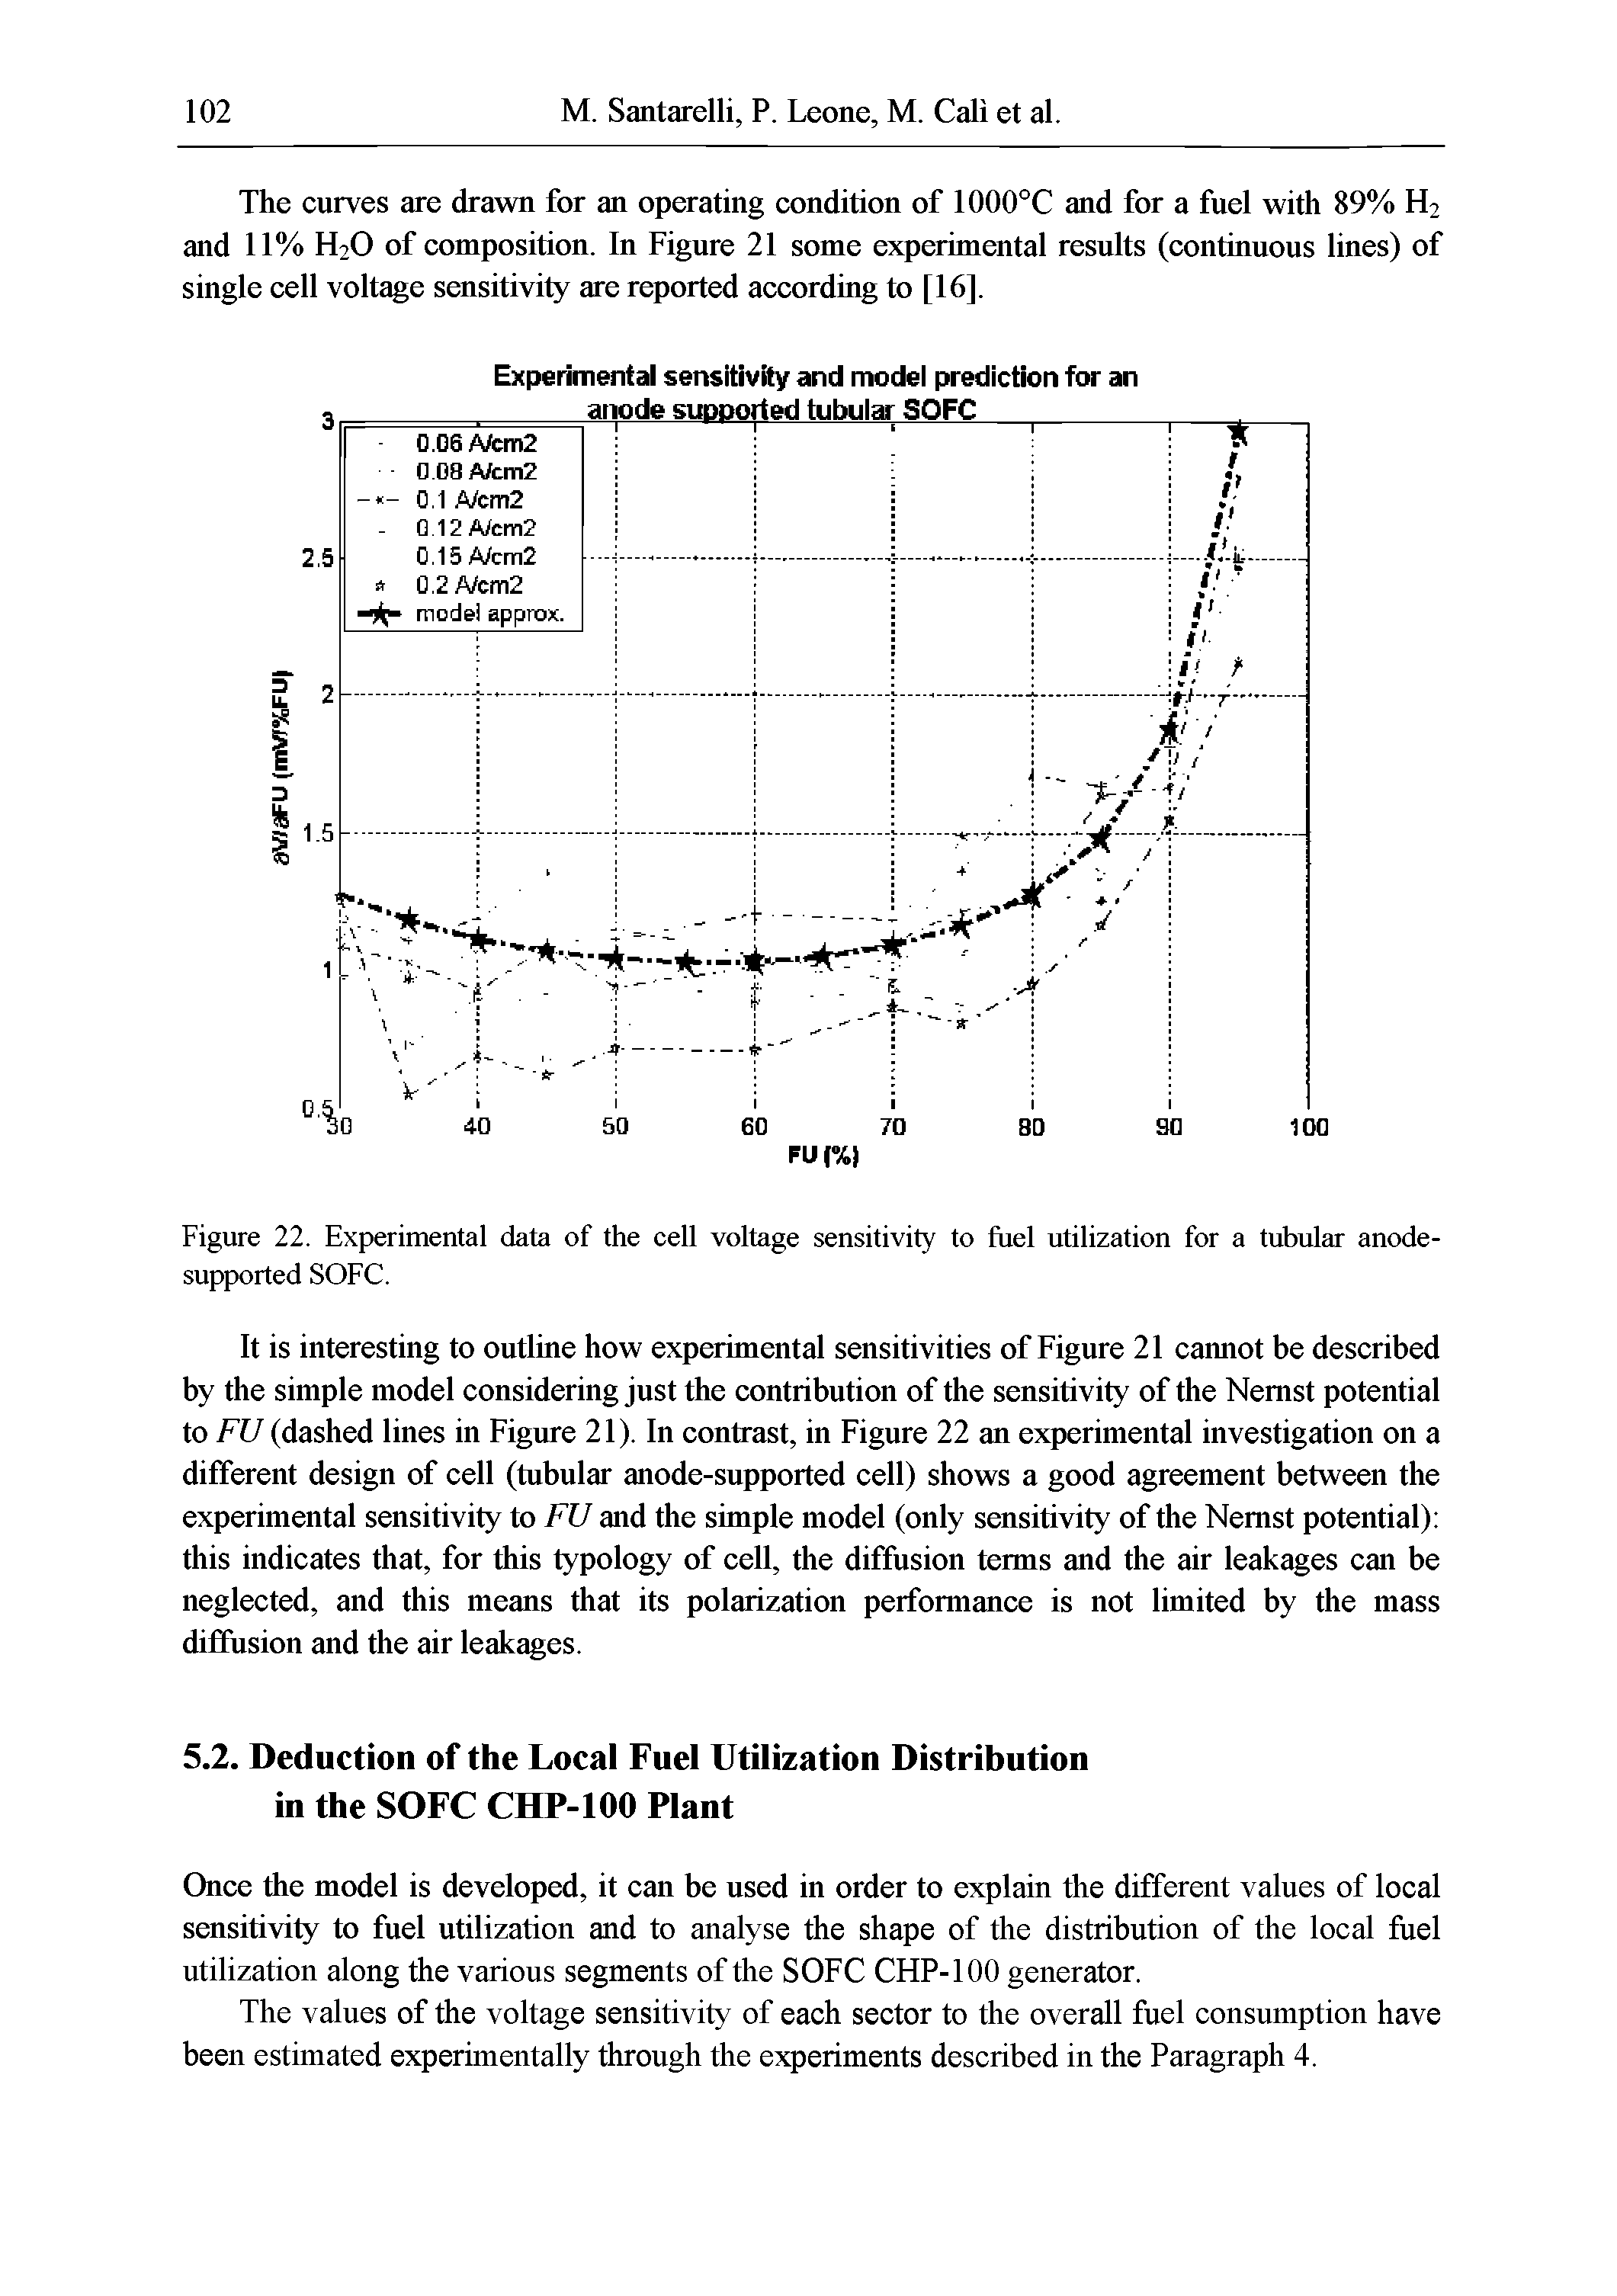 Figure 22. Experimental data of the cell voltage sensitivity to fuel utilization for a tubular anode-supported SOFC.